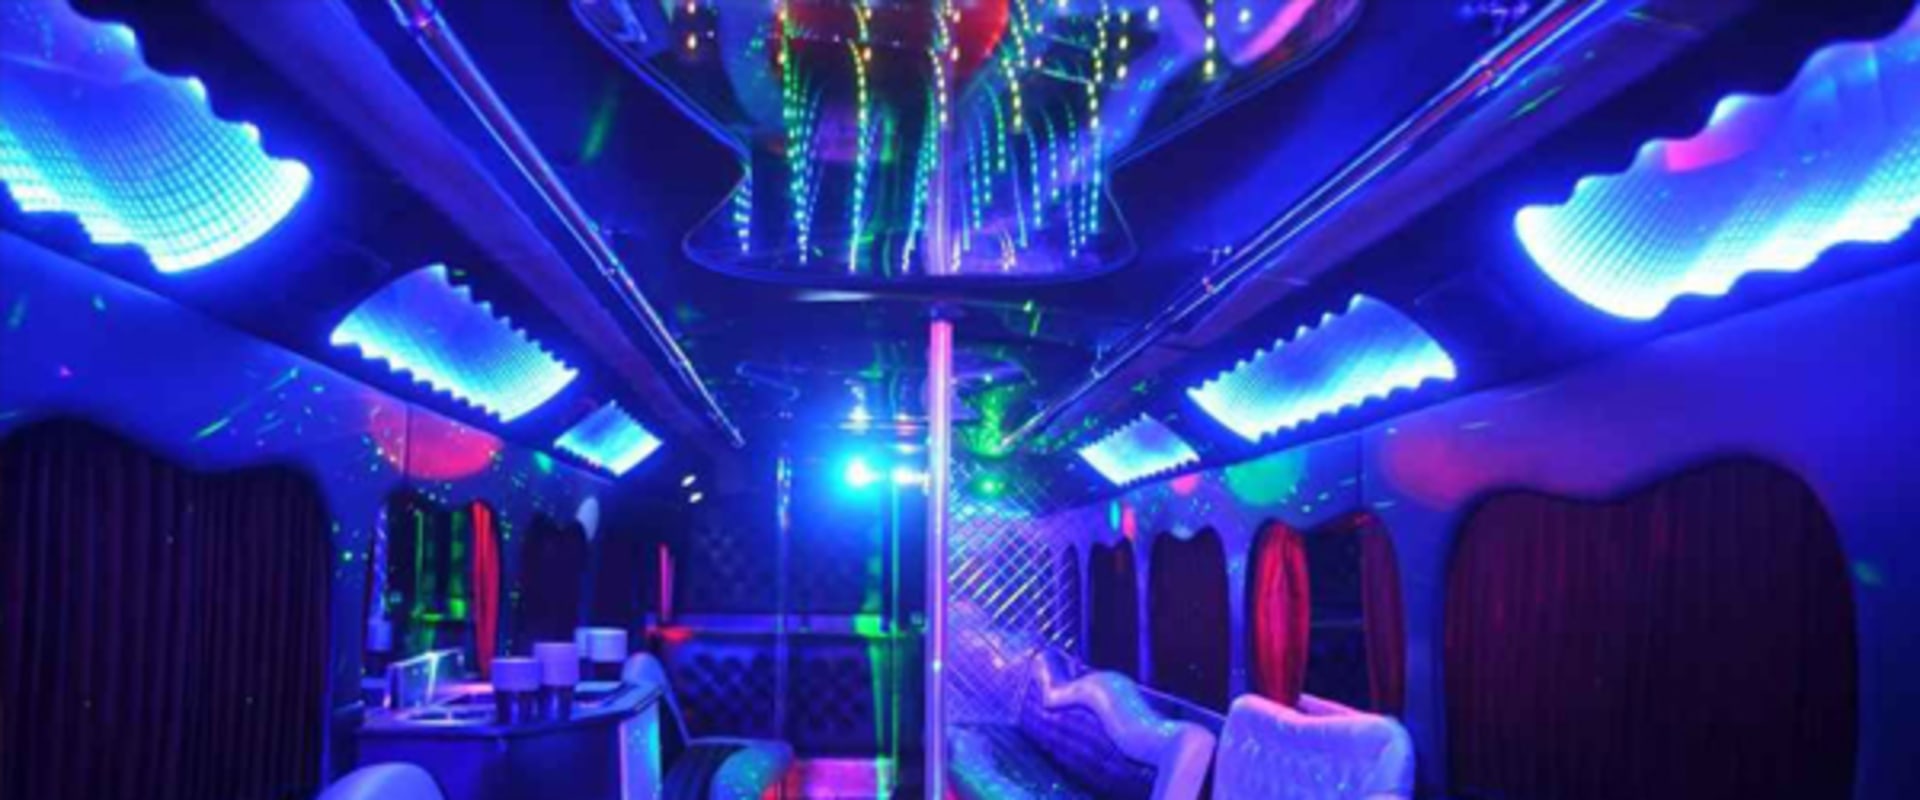 How much does party bus cost?